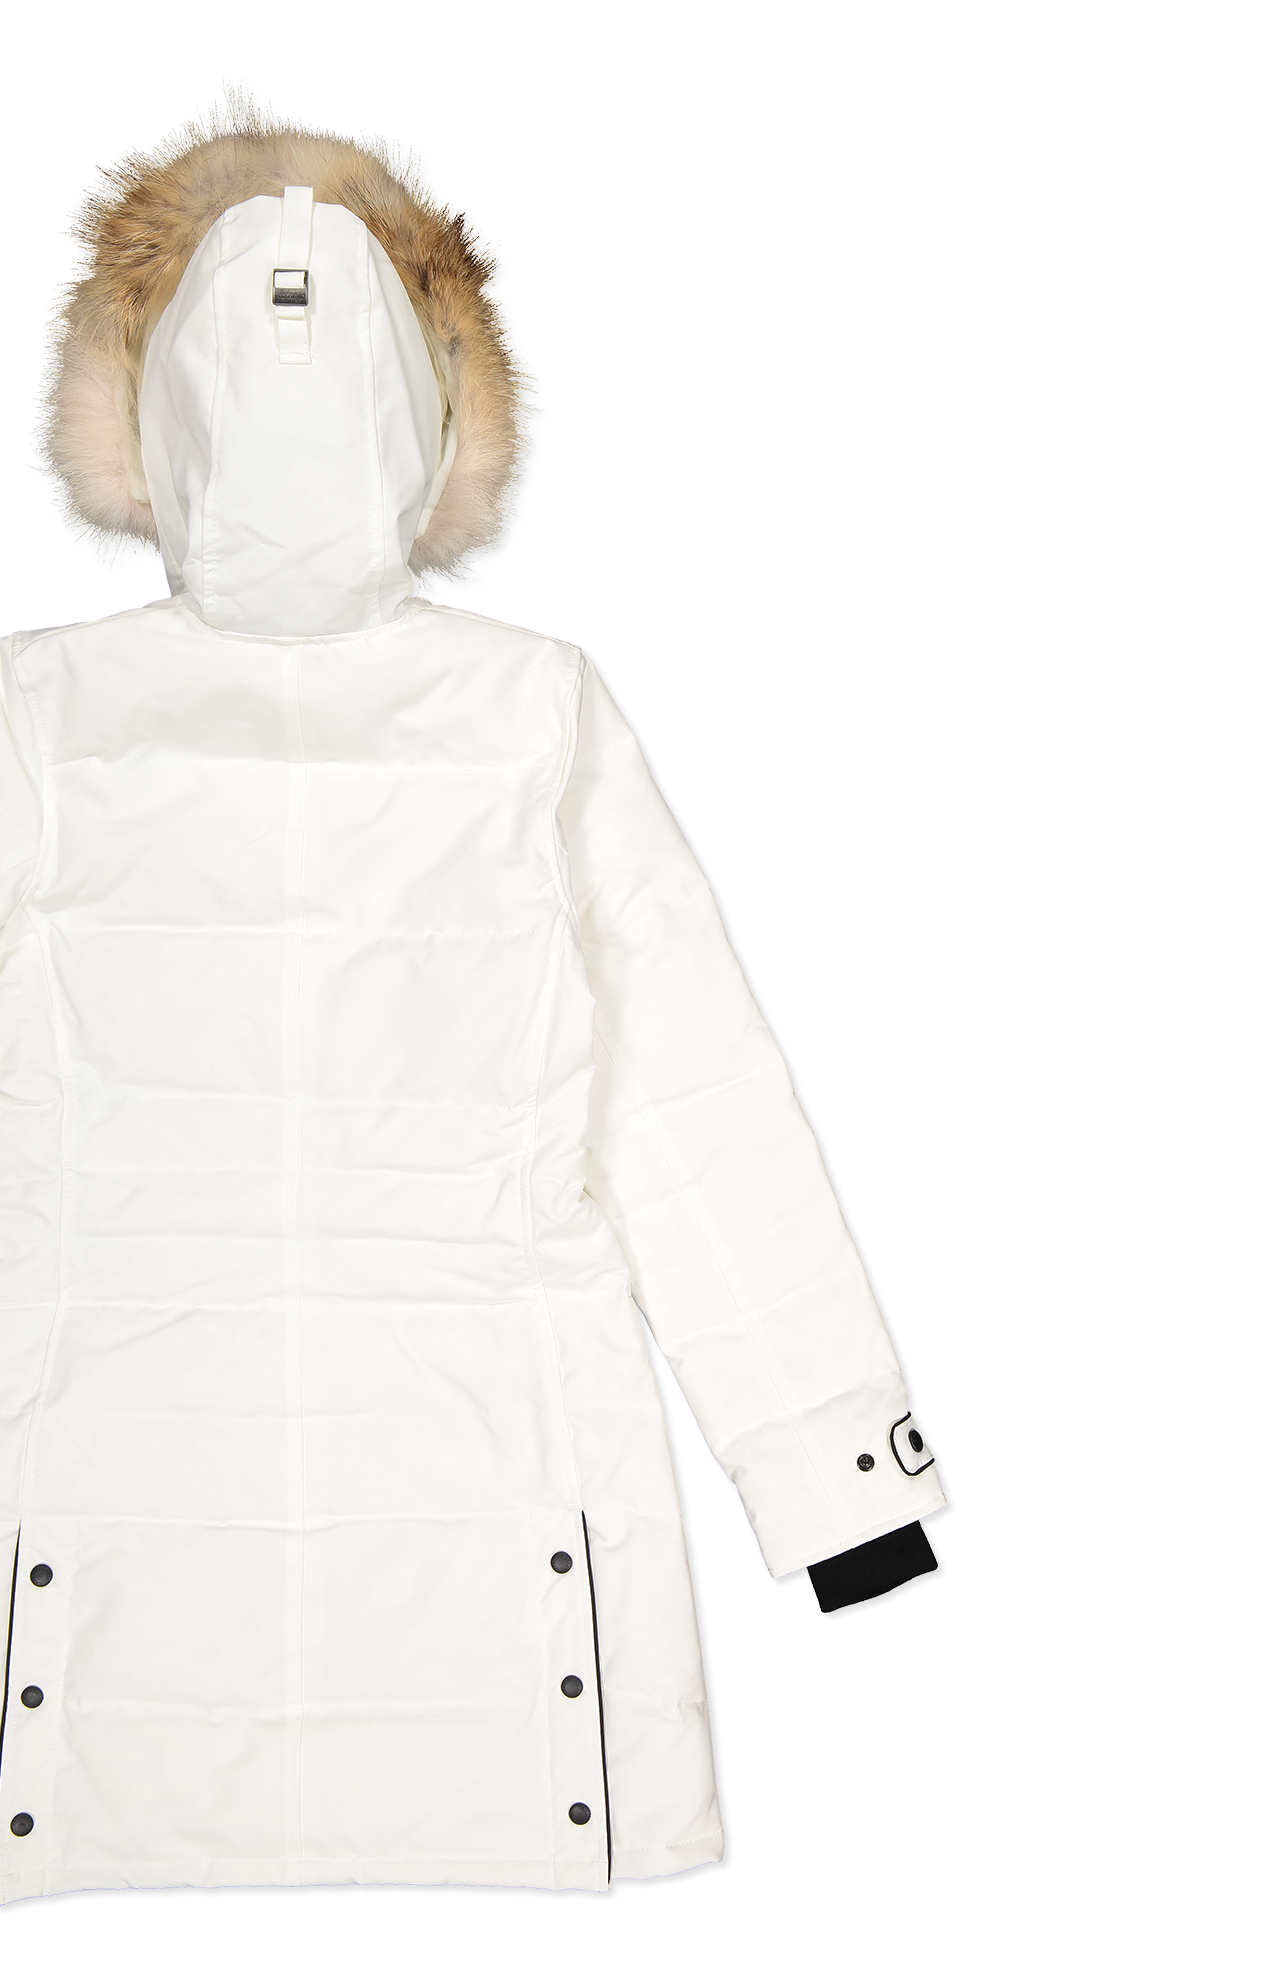 Canada Goose Lorette Parka in Star White - Back Detail Image  (6955446173811)